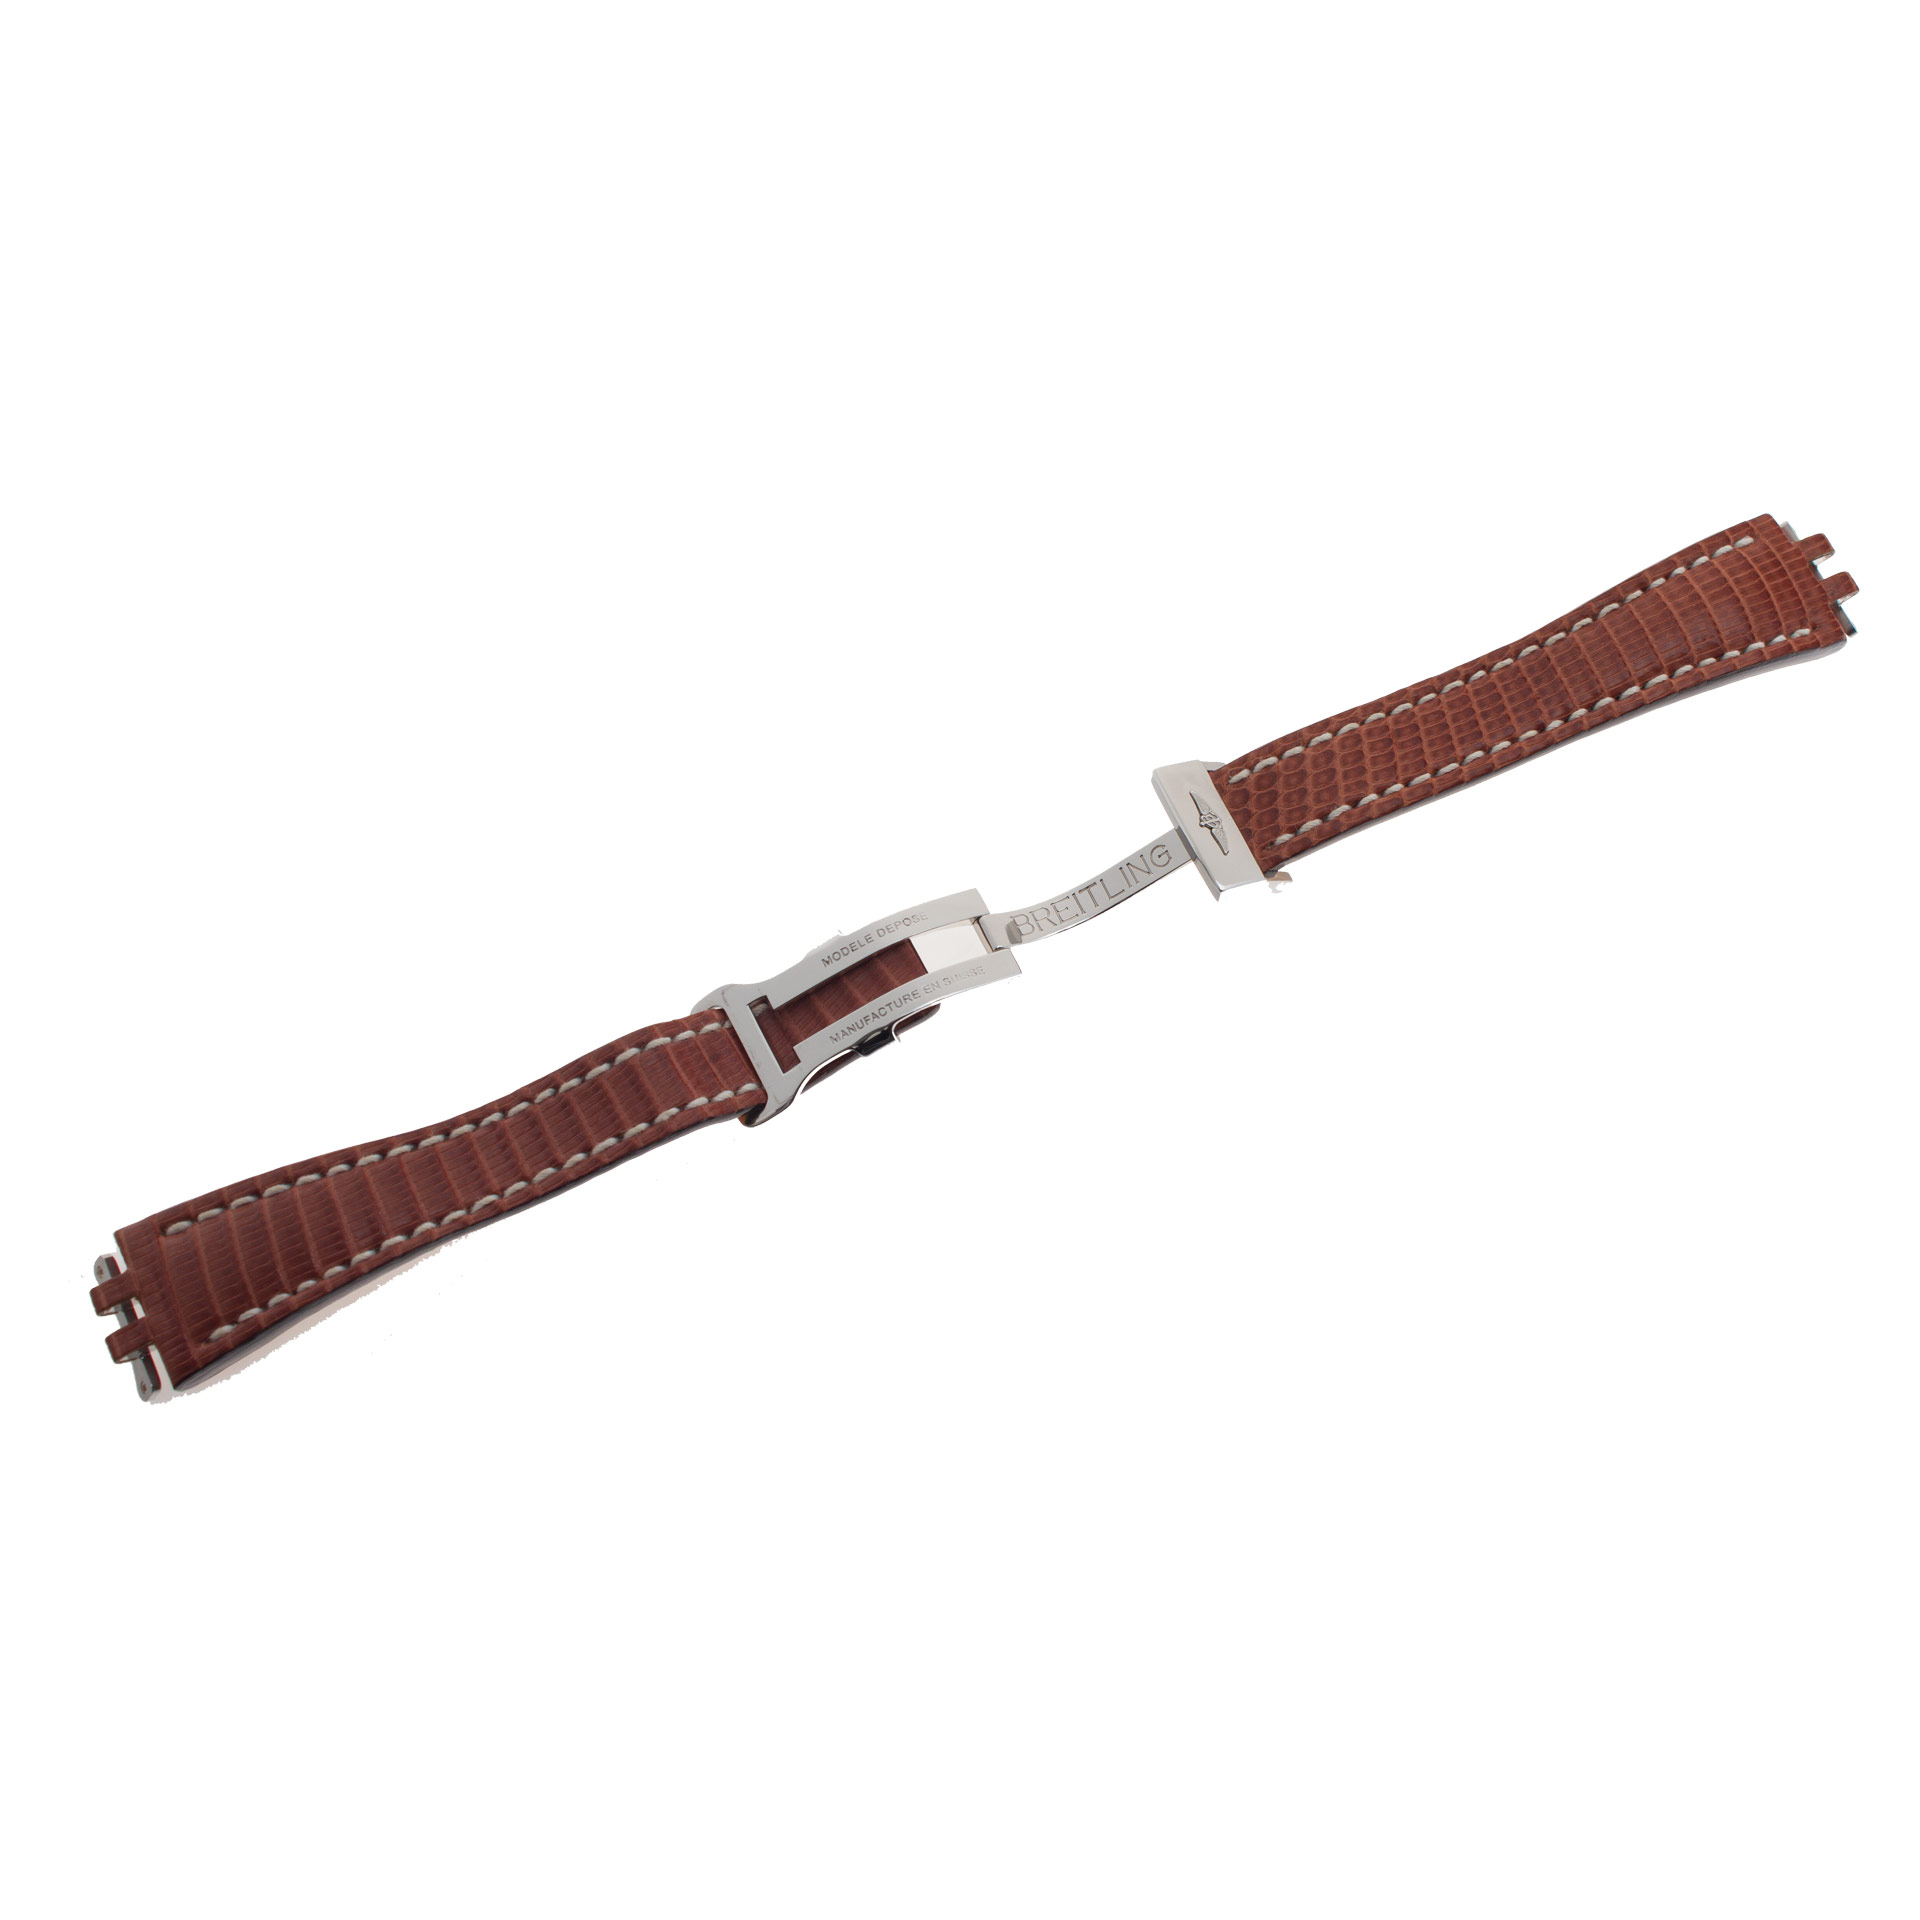 Breitling brown lizard strap 19x14 with stainless steel deployment buckle (Default)